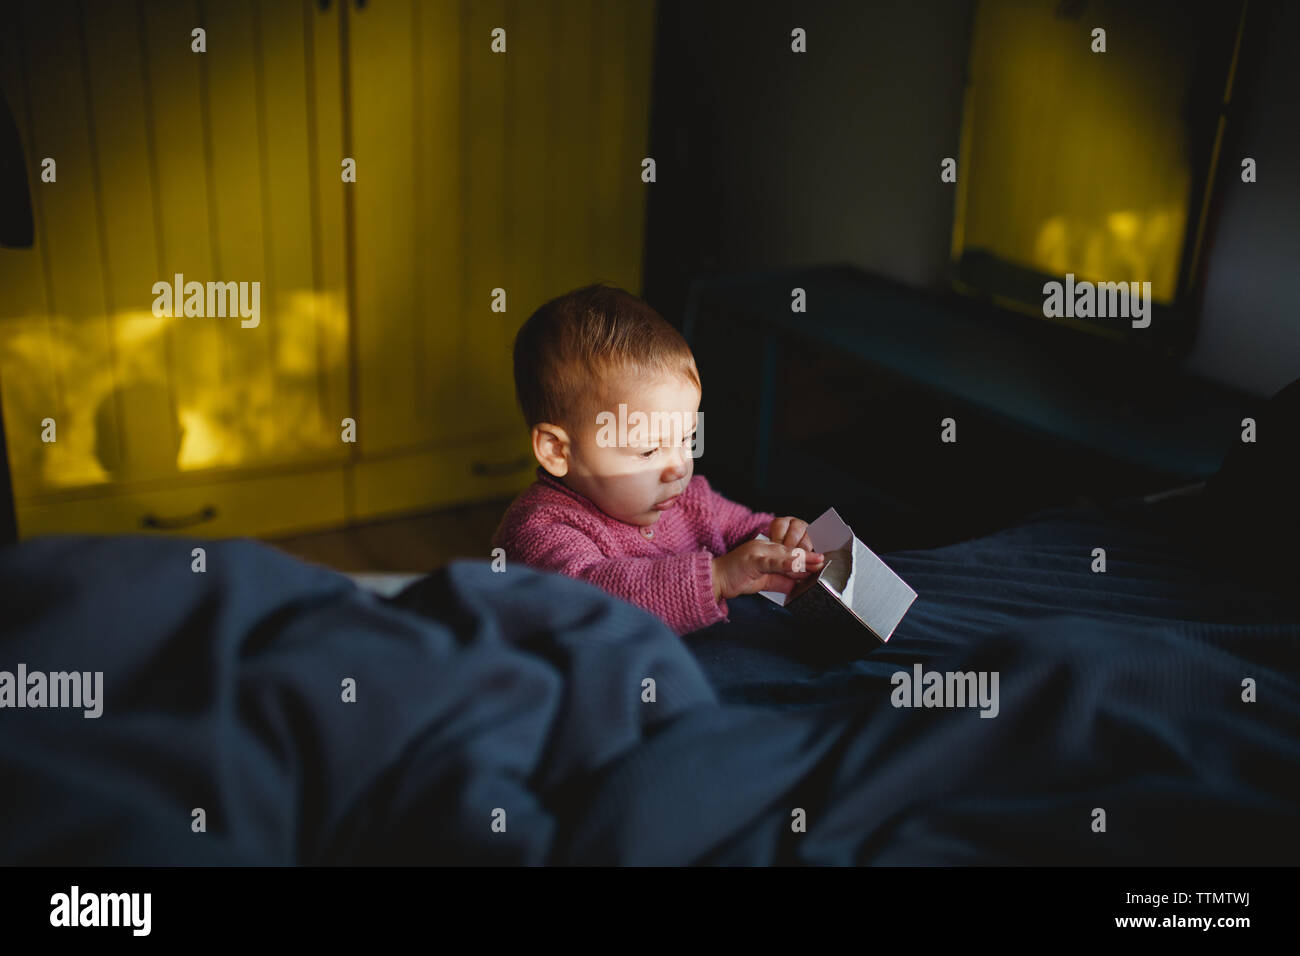 A baby girl playing with an empty carton box on bed Stock Photo